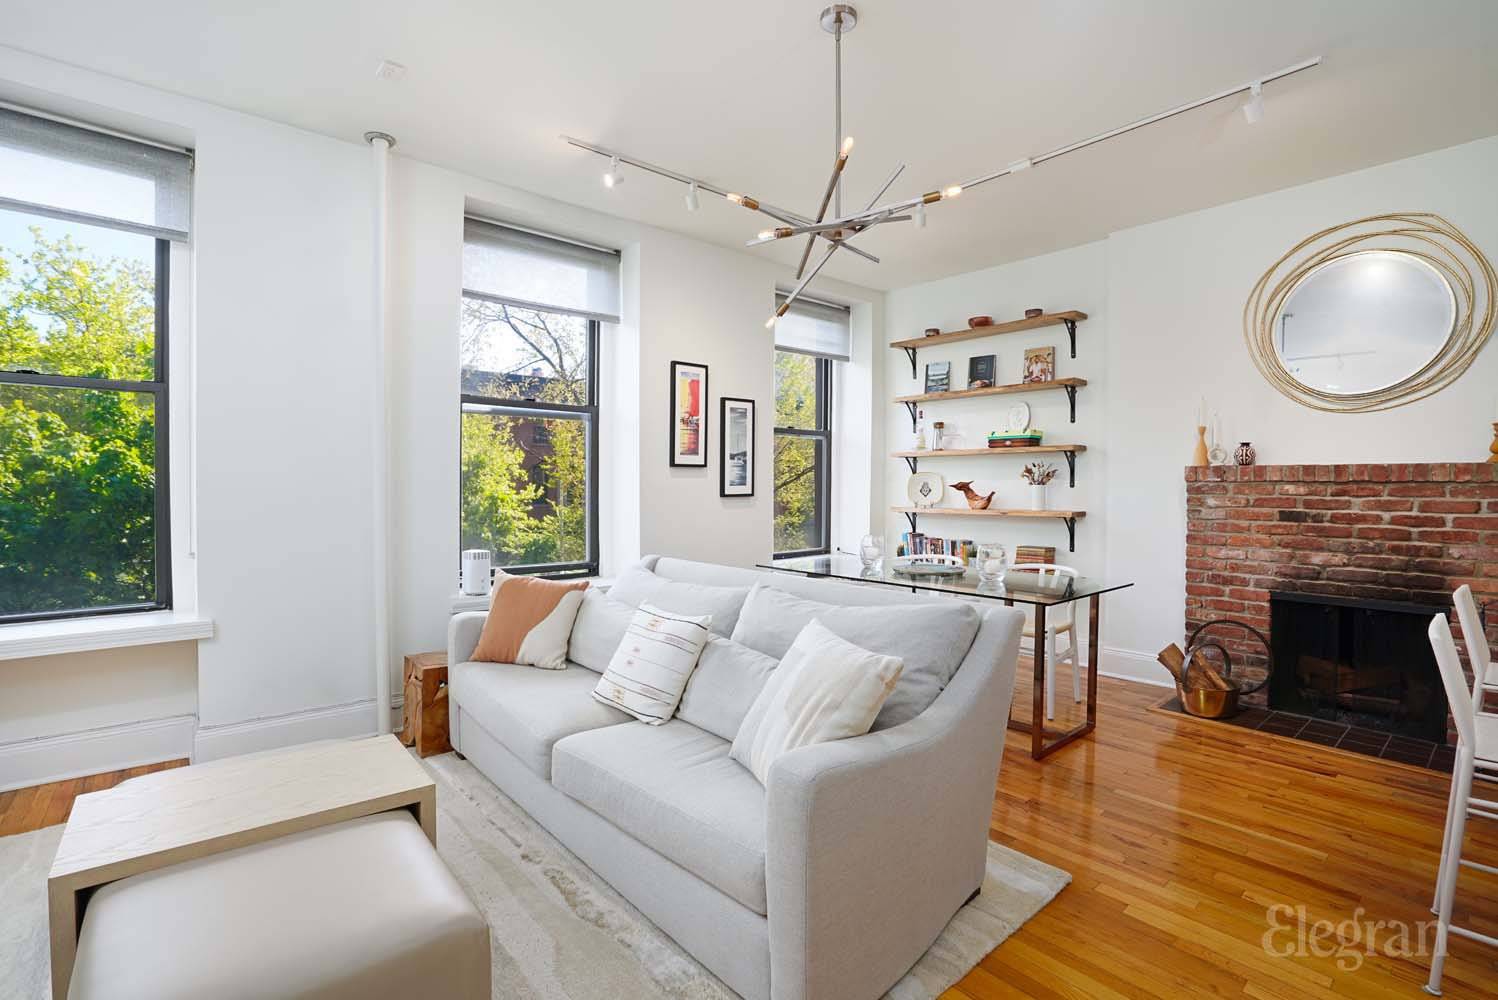 PARK SLOPE BROWNSTONE OASIS WITH PRIVATE TERRACE Beautifully set among the tree lined avenues of Park Slope, this second floor, 2 bedroom apartment provides an incredible sanctuary with the best ...